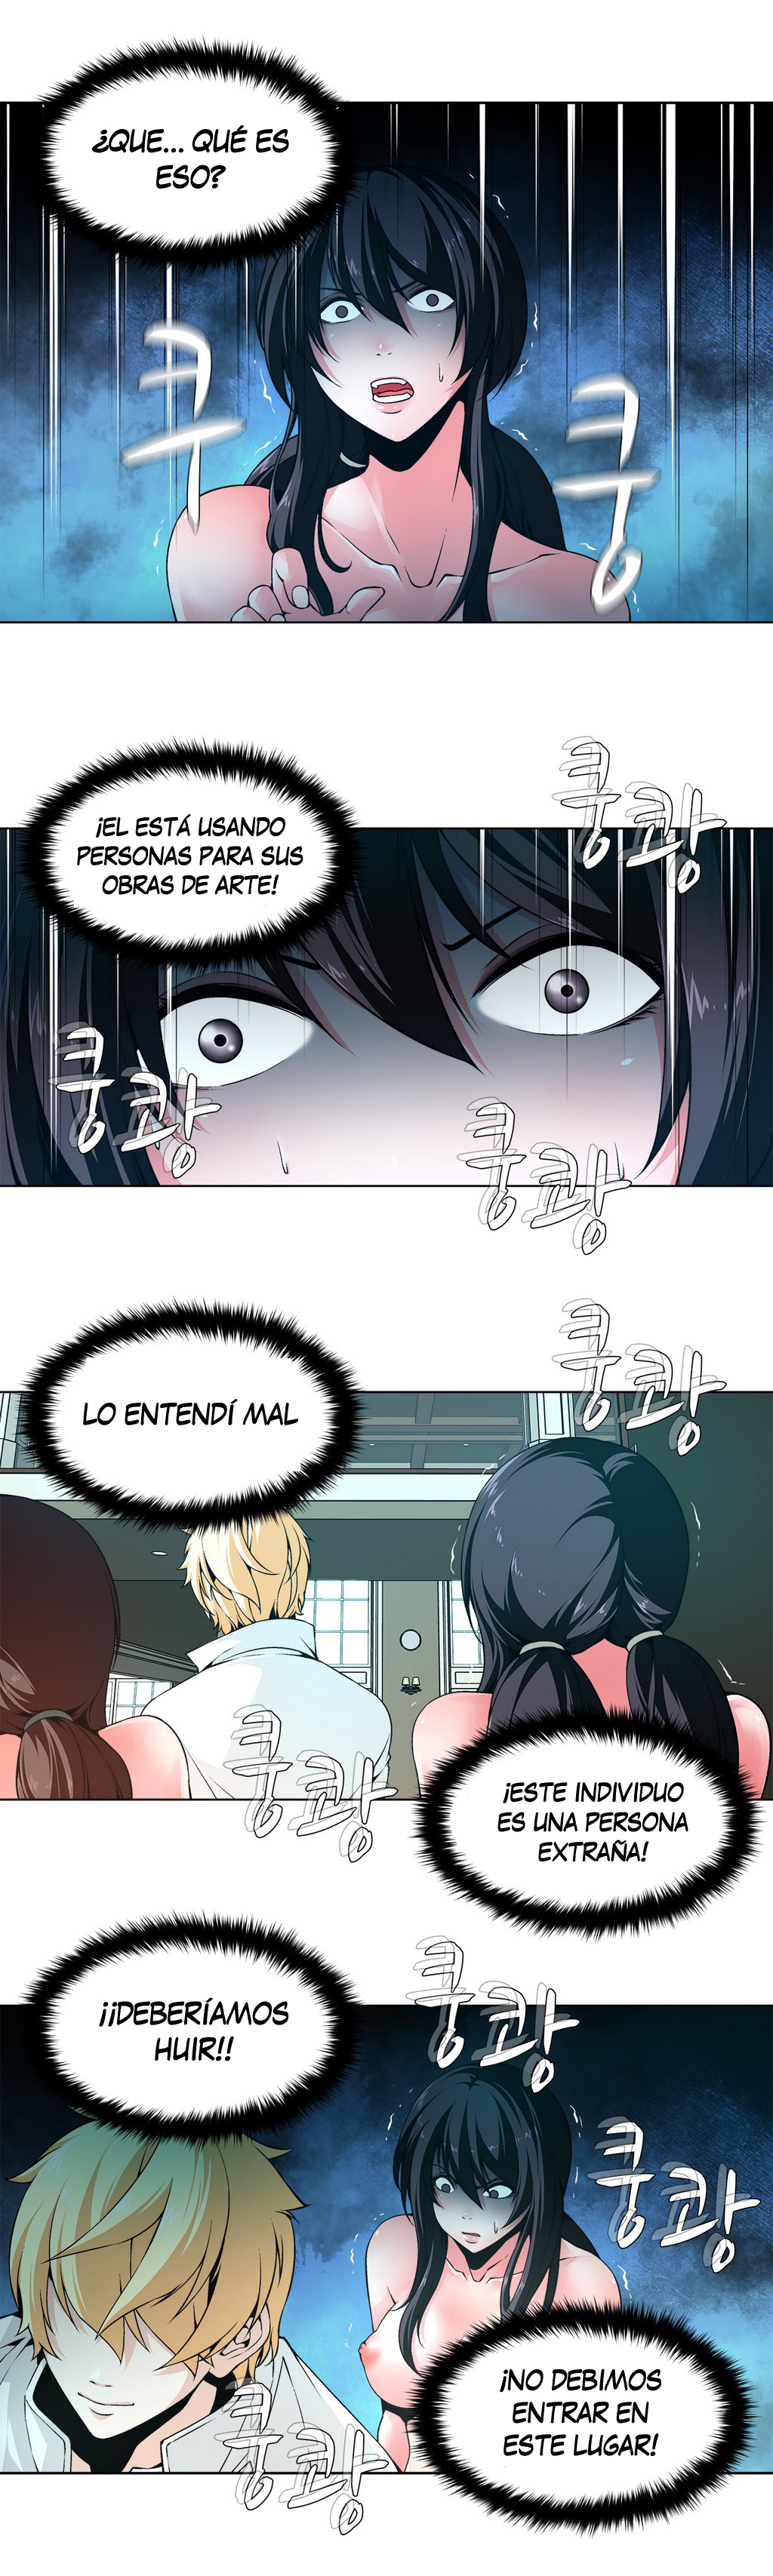 [Fantastic Whale] Twin Slave Ch.1-6 (Spanish)[Otakurinos FanSub](Ongoing) 